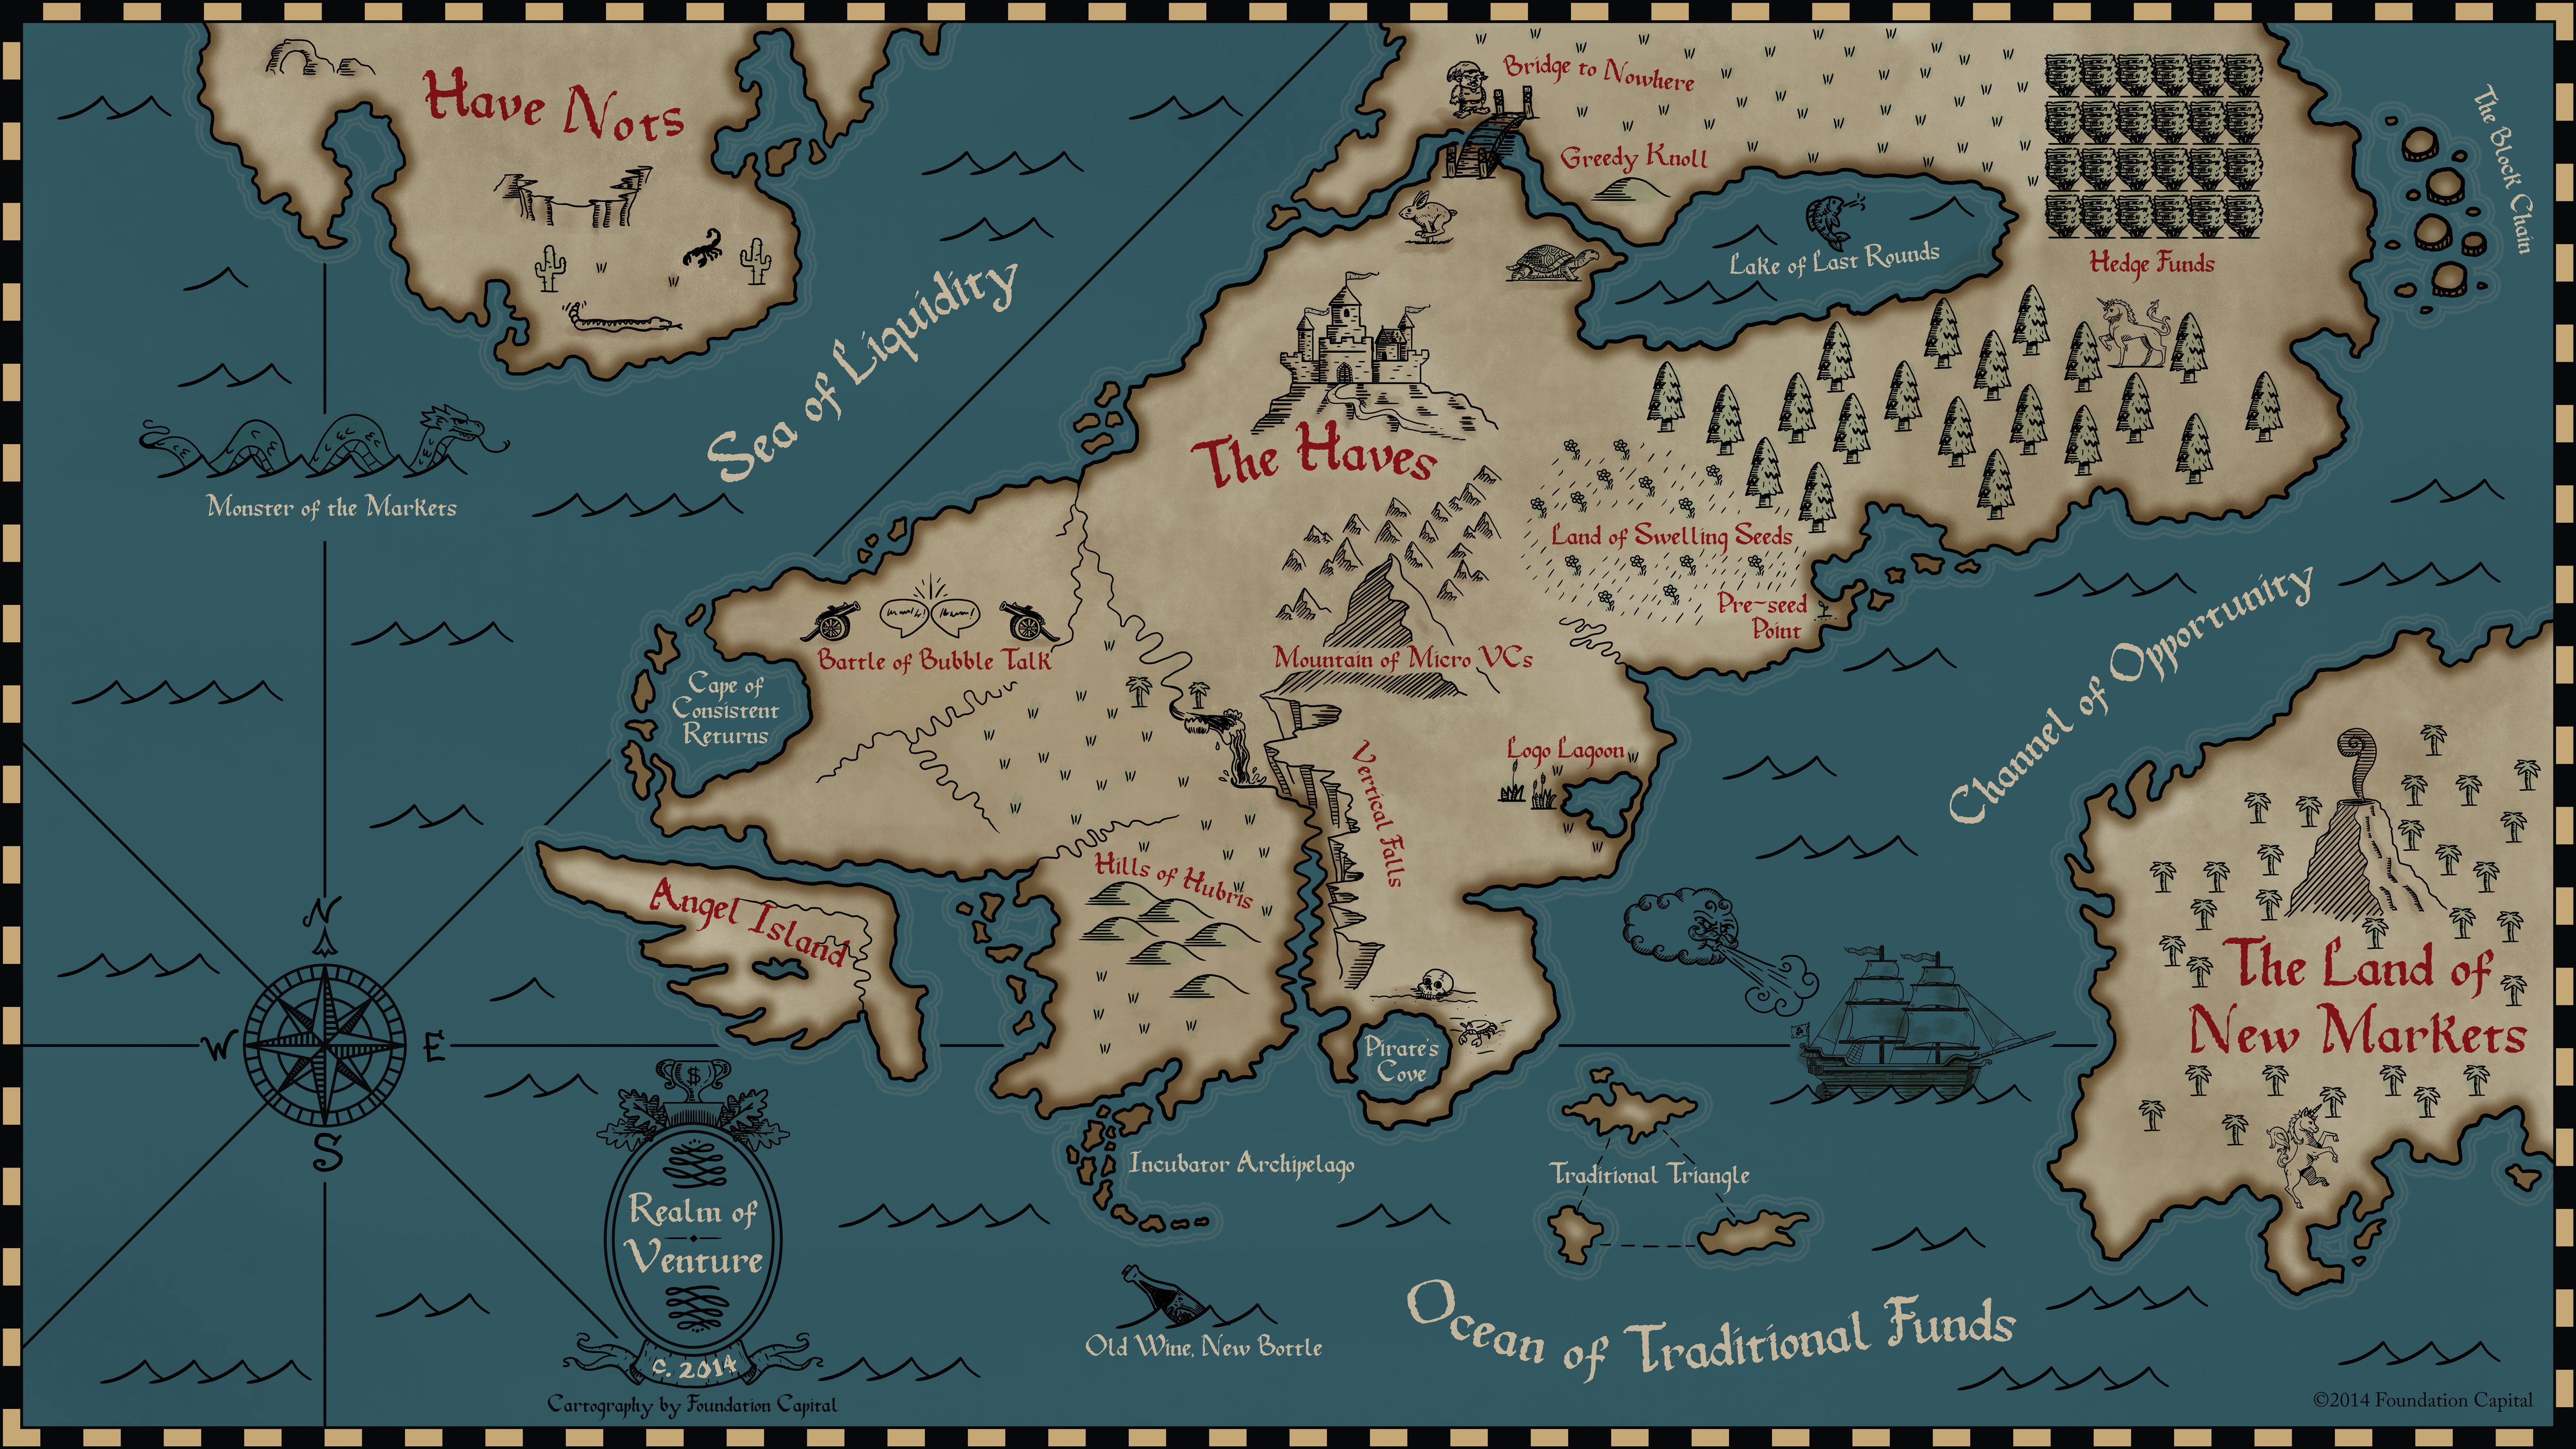 The-Realm-of-Venture-MAP_copyright-2014